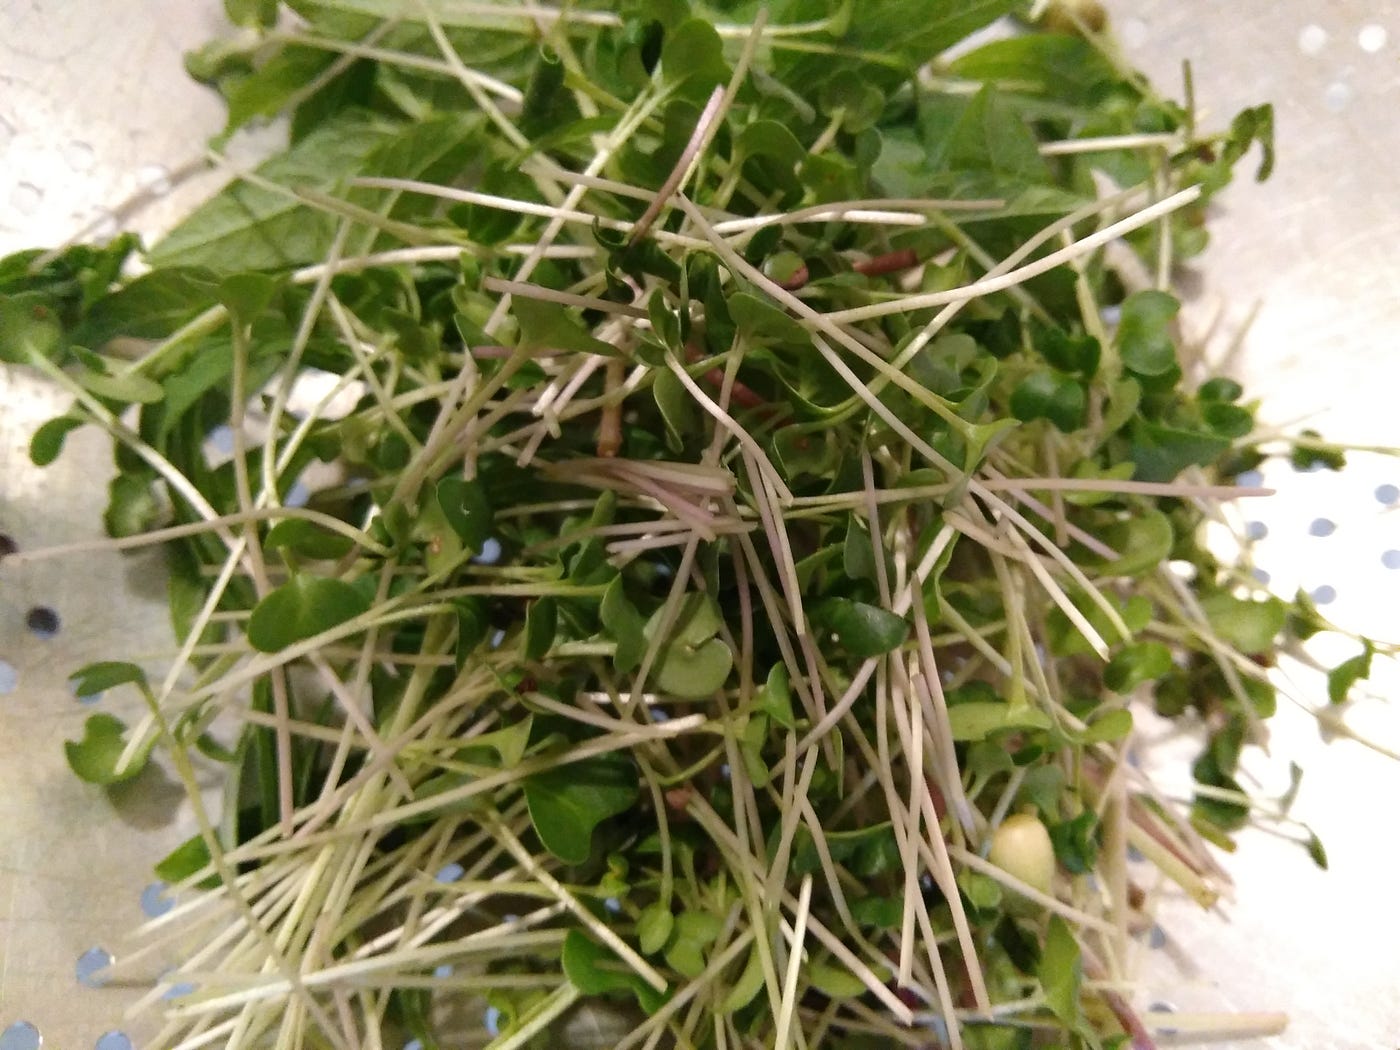 Pile of green salad sprouts.